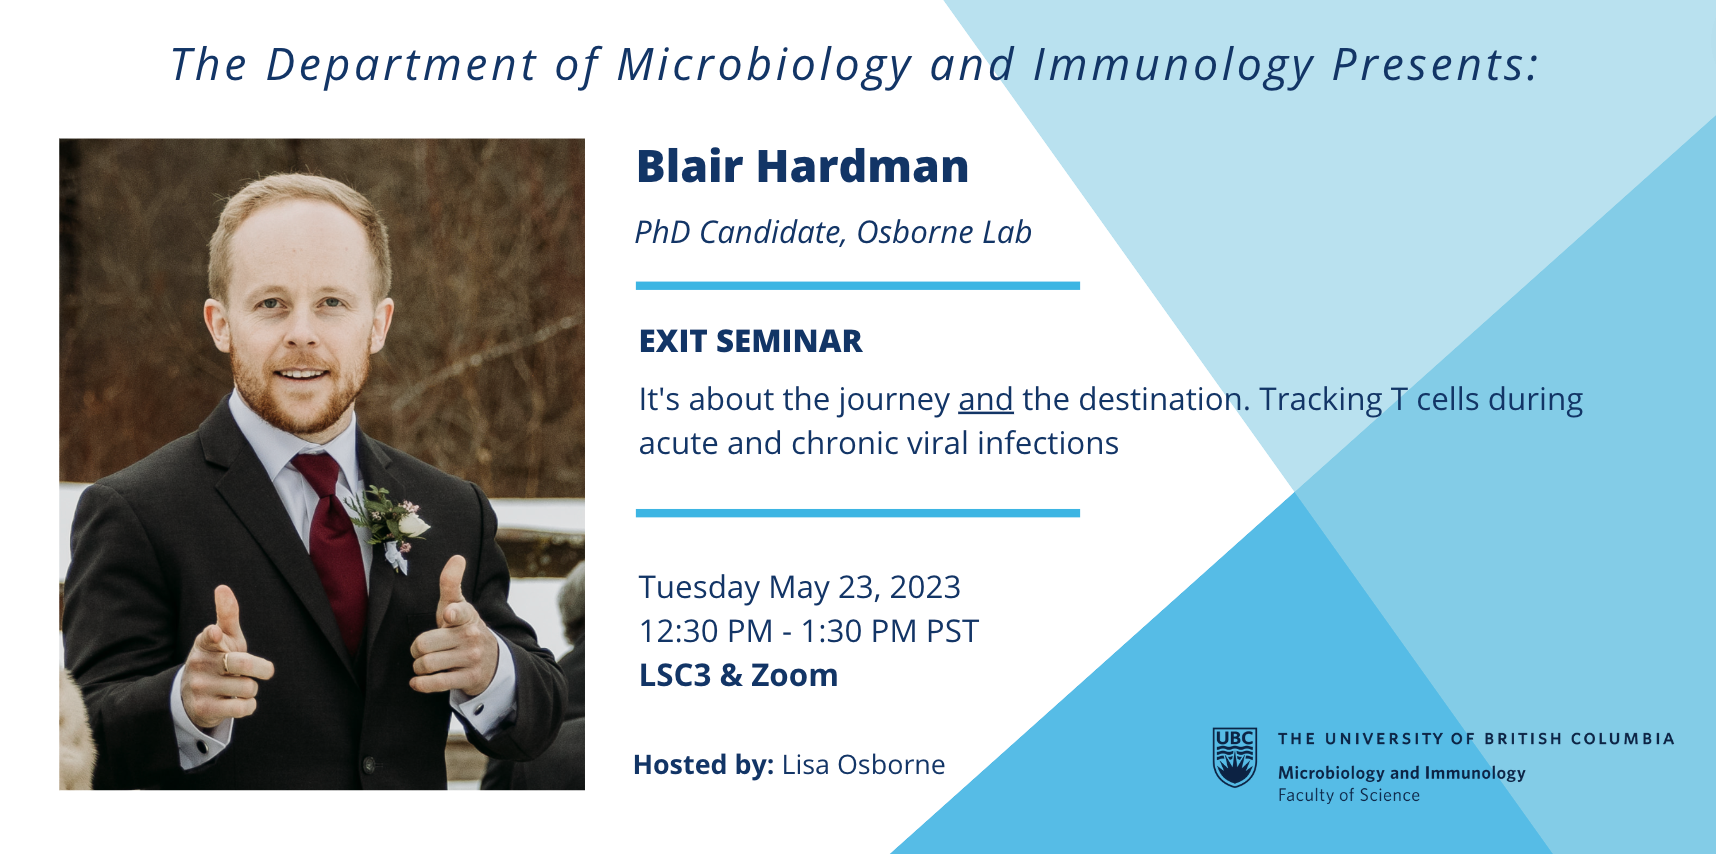 Poster of event with photo of Blair Hardman and his seminar title.